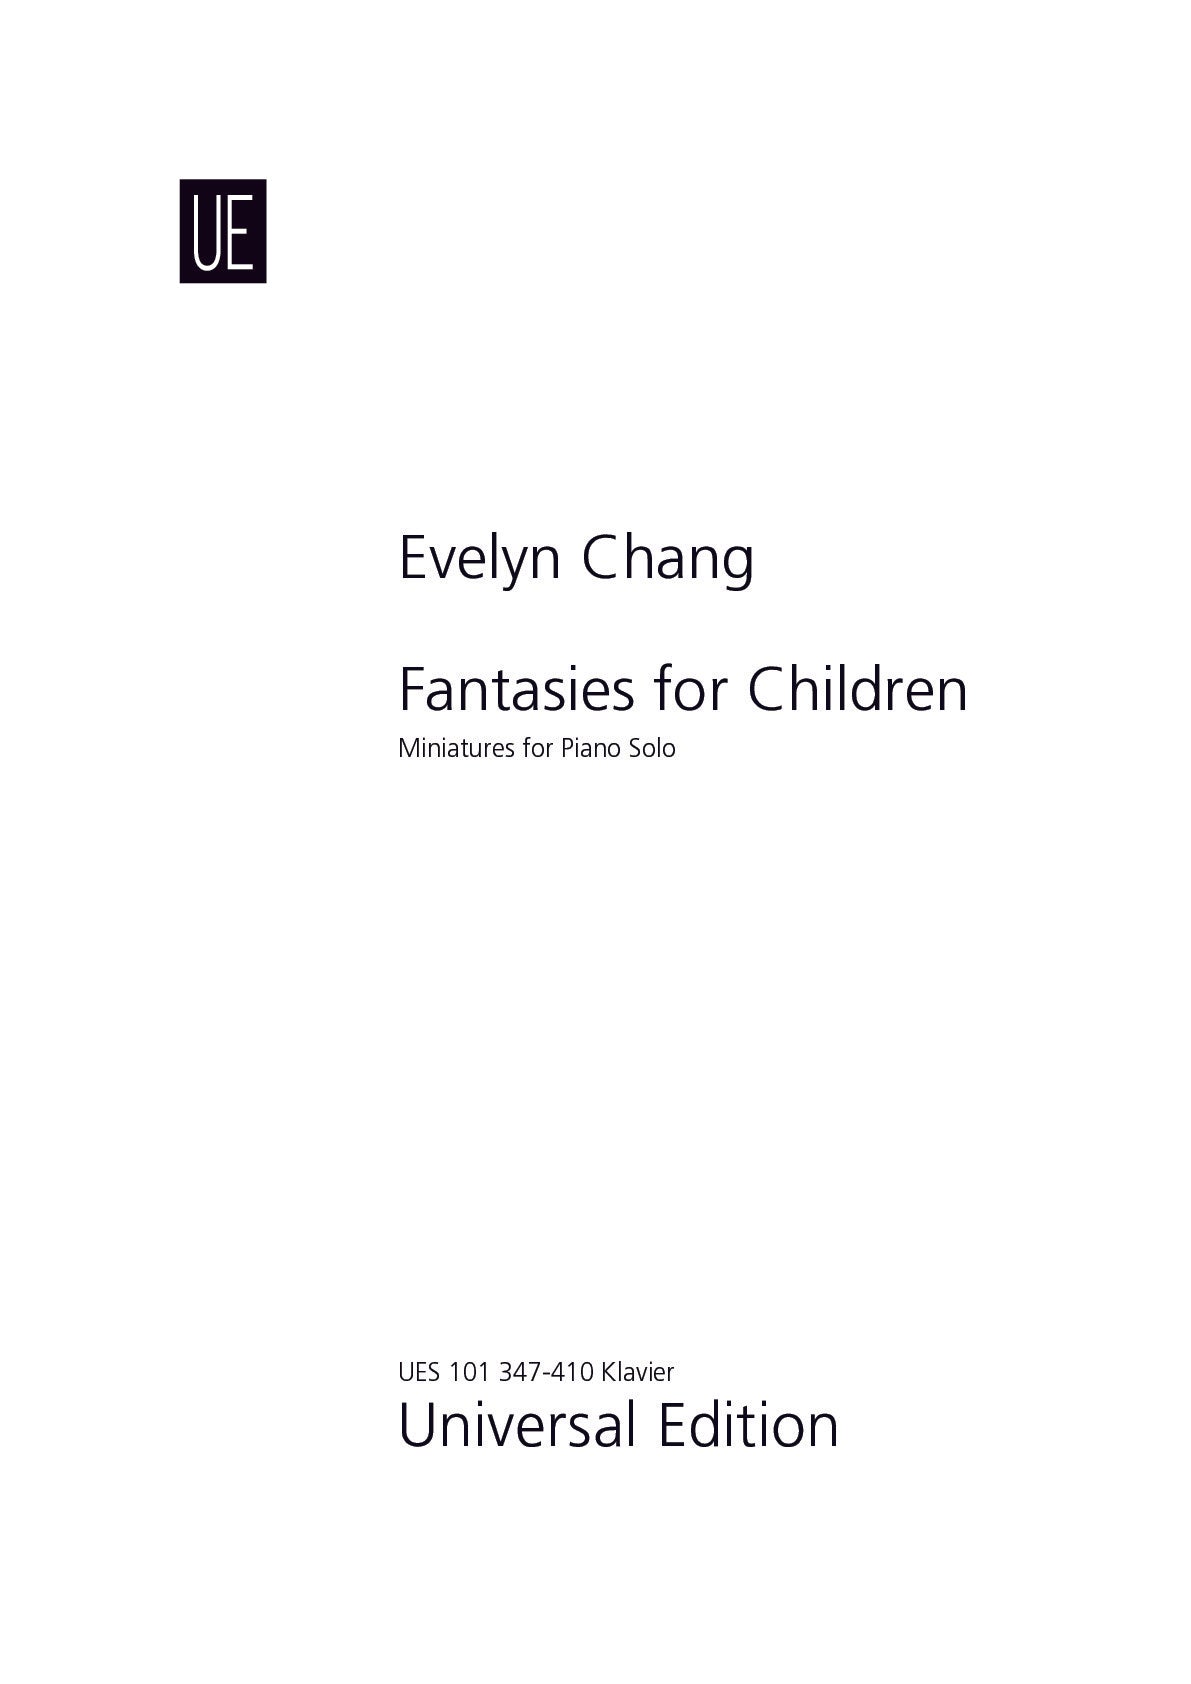 Evelyn Chang : Fantasies for Children - Miniatures for Piano Solo (2021)